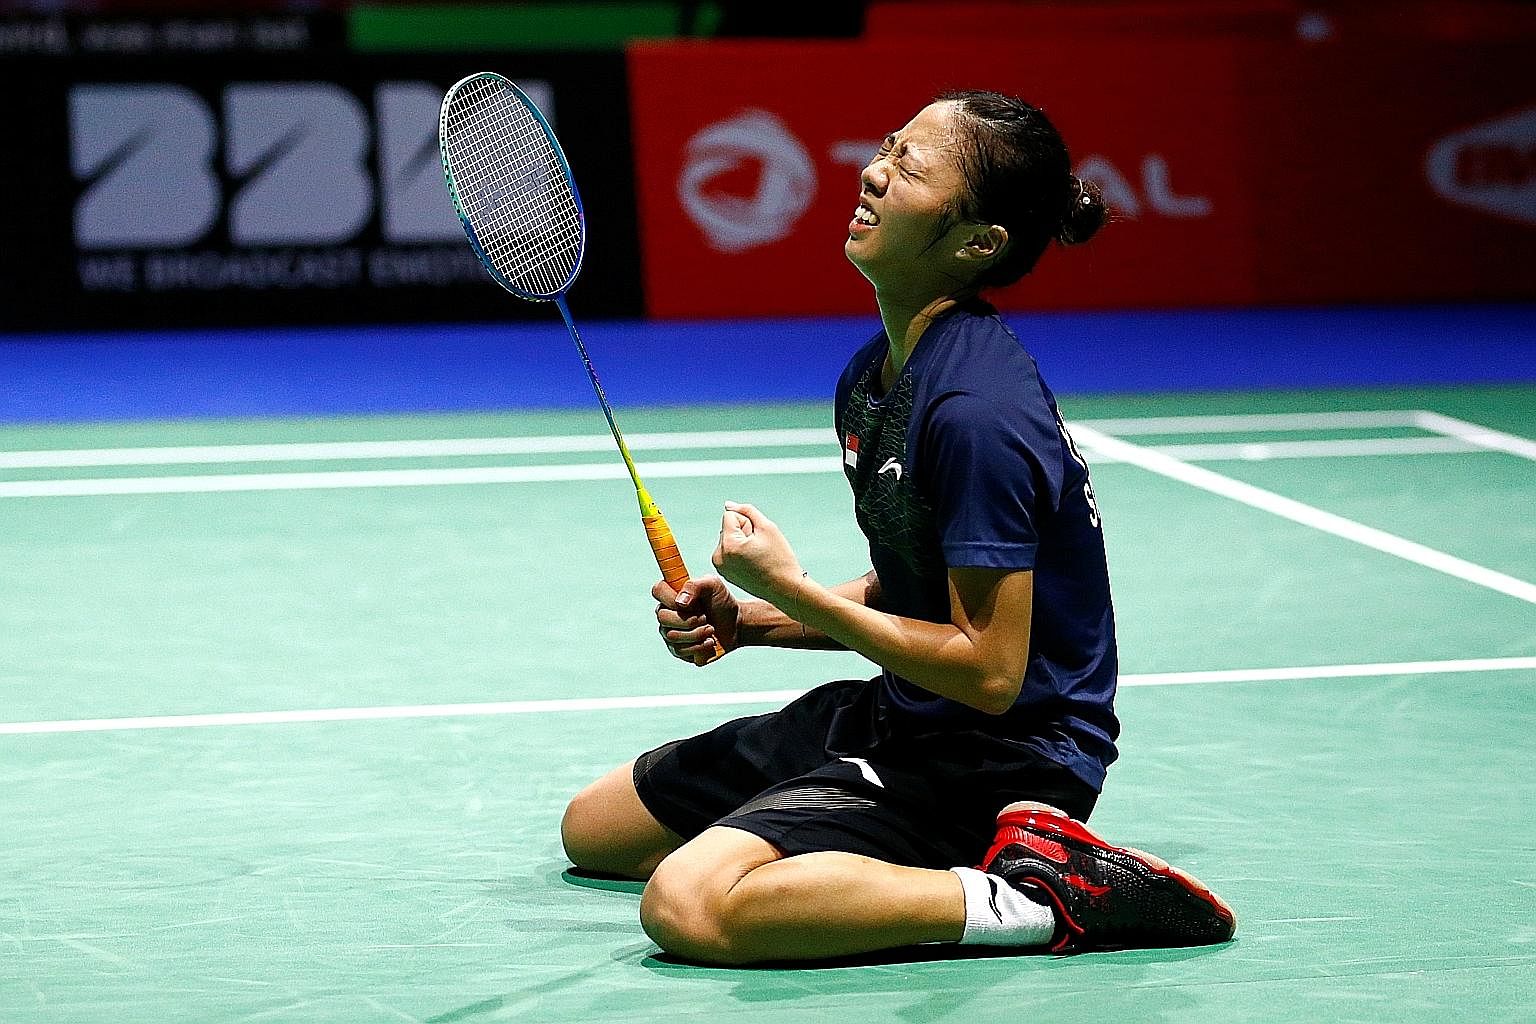 Singaporean shuttler Yeo Jia Min celebrating her 21-15, 14-21, 21-16 win over Vu Thi Trang of Vietnam at the BWF World Championships in Basel, Switzerland, yesterday. With her win, Yeo, 20, became the first Singaporean woman to reach the singles quar